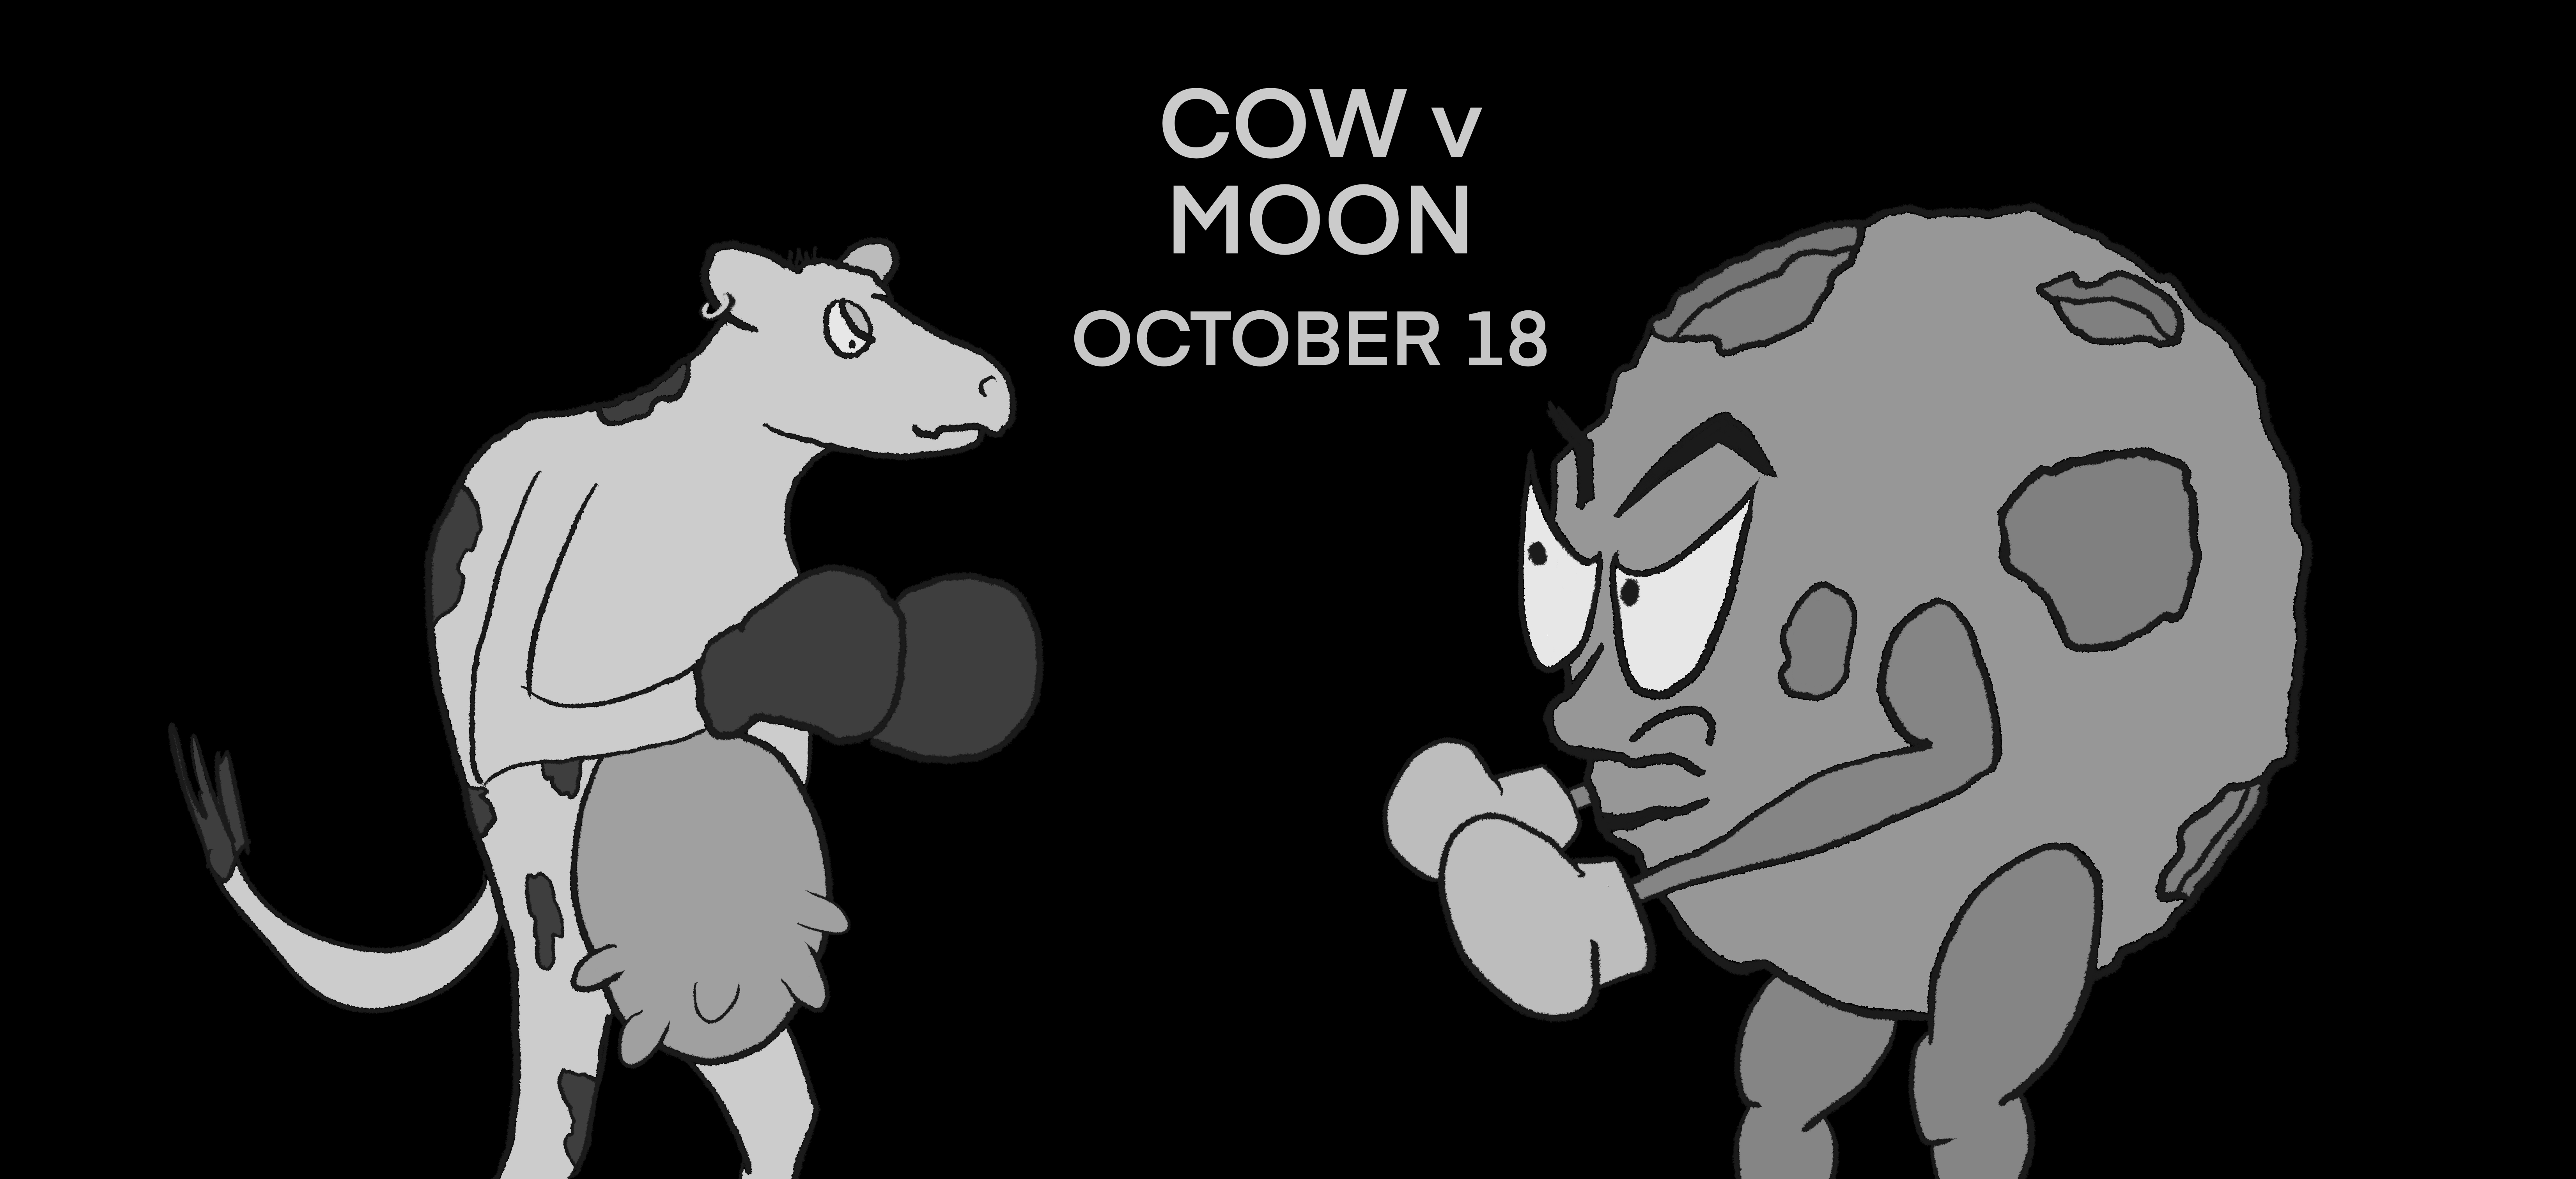 image from Cow v Moon